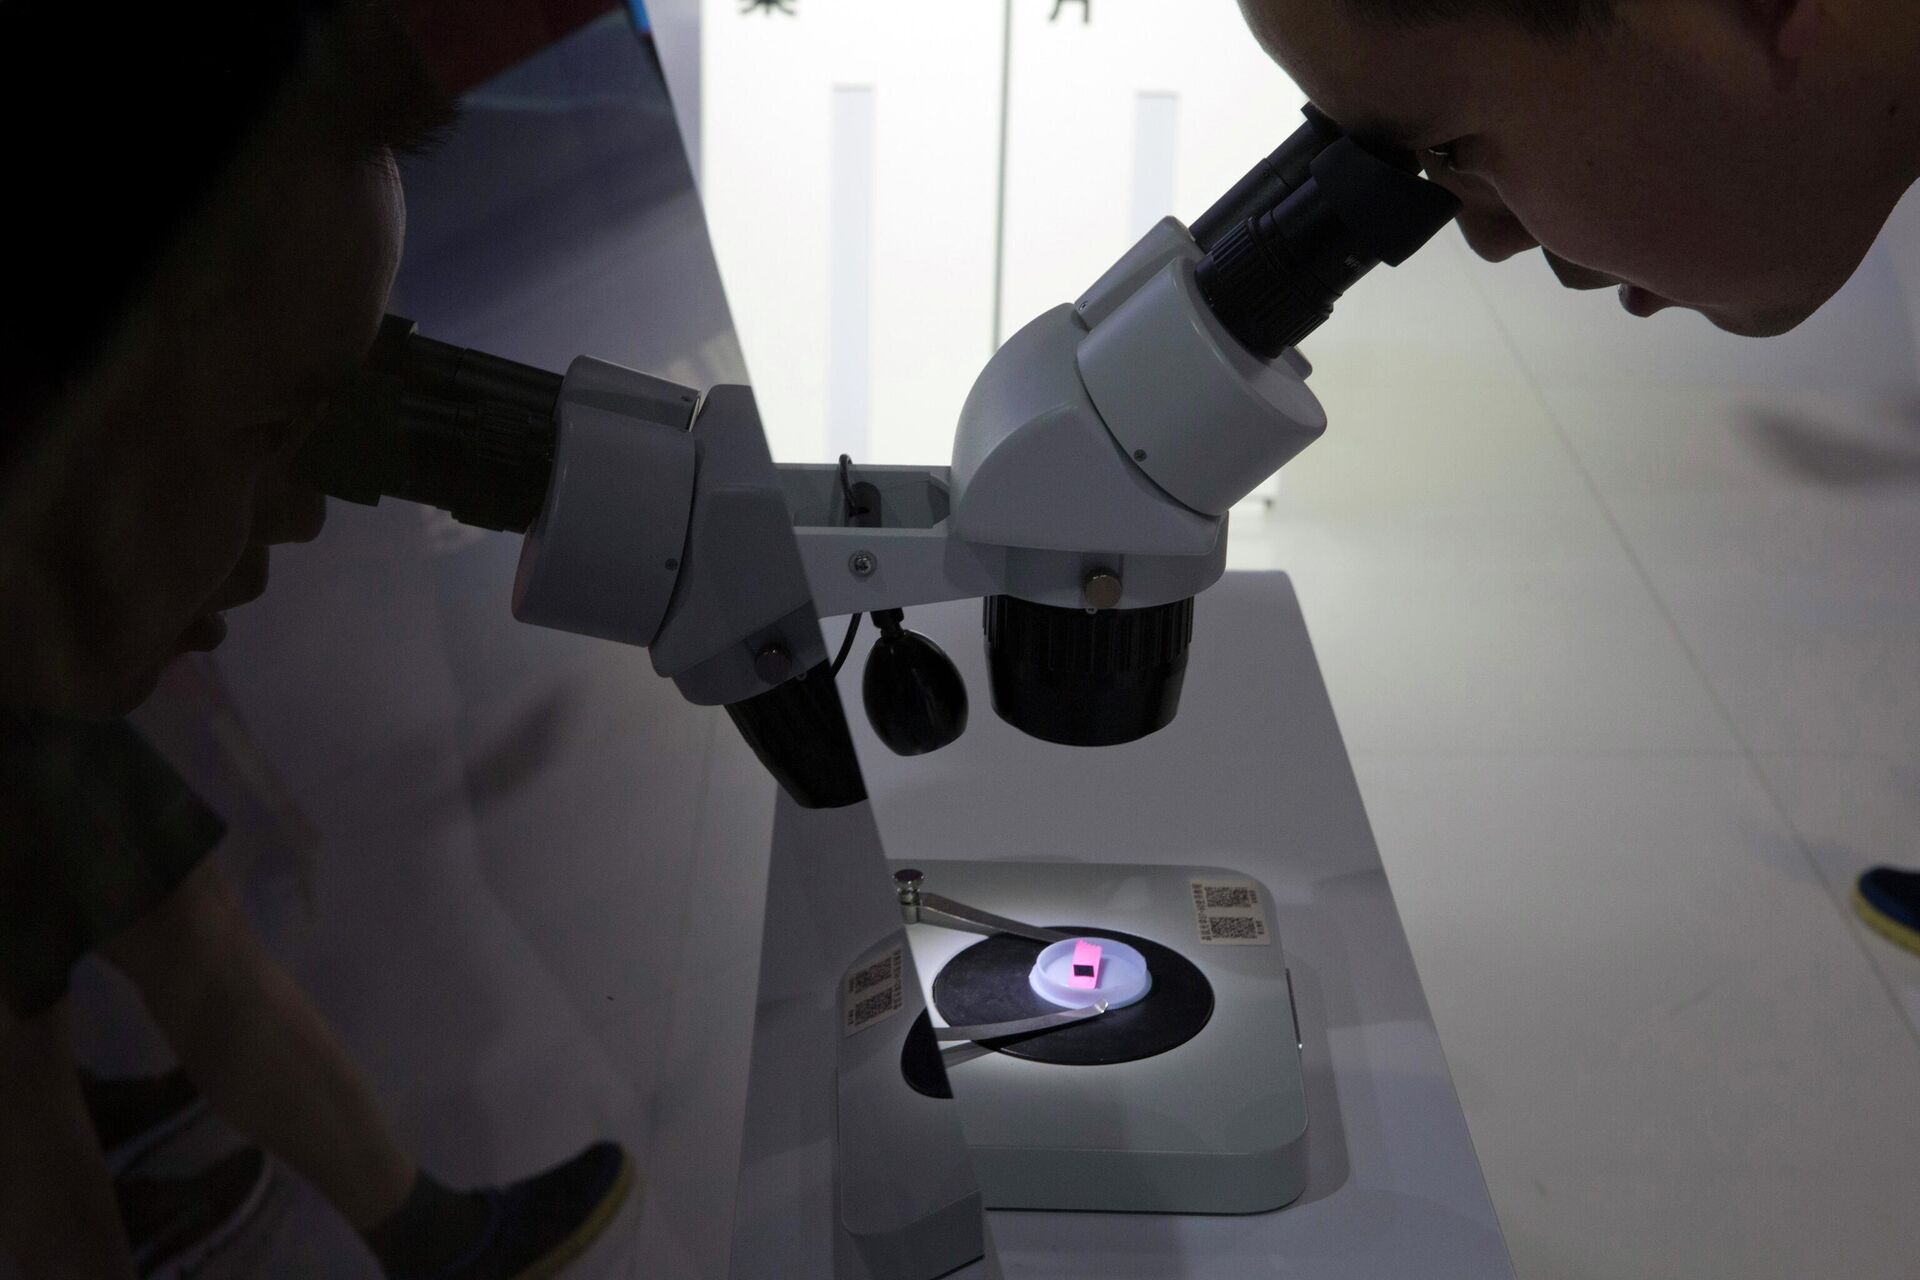 FILE - A visitor to the 21st China Beijing International High-tech Expo looks at a computer chip through the microscope displayed by the state-controlled Tsinghua Unigroup project which has emerged as a national champion for Beijing's semiconductor ambitions in Beijing, China on May 17, 2018 - Sputnik International, 1920, 25.07.2022